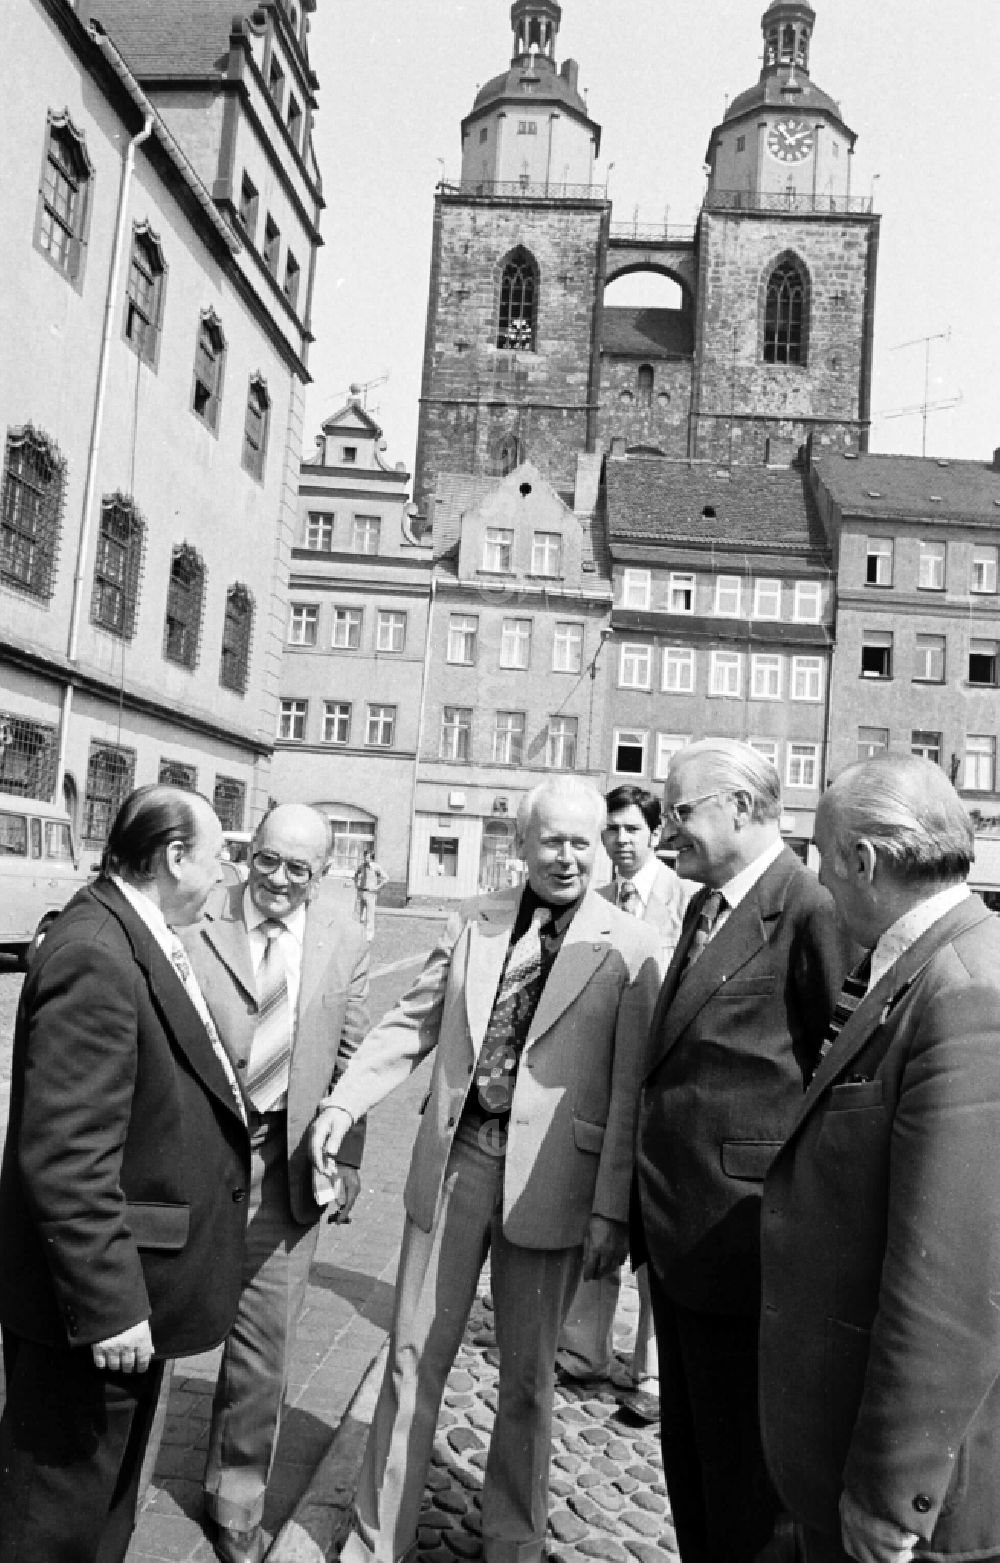 Lutherstadt Wittenberg: Guided tour and sightseeing on the occasion of a city tour General G. Goettnig in Lutherstadt Wittenberg in the federal state of Saxony-Anhalt on the territory of the former GDR, German Democratic Republic